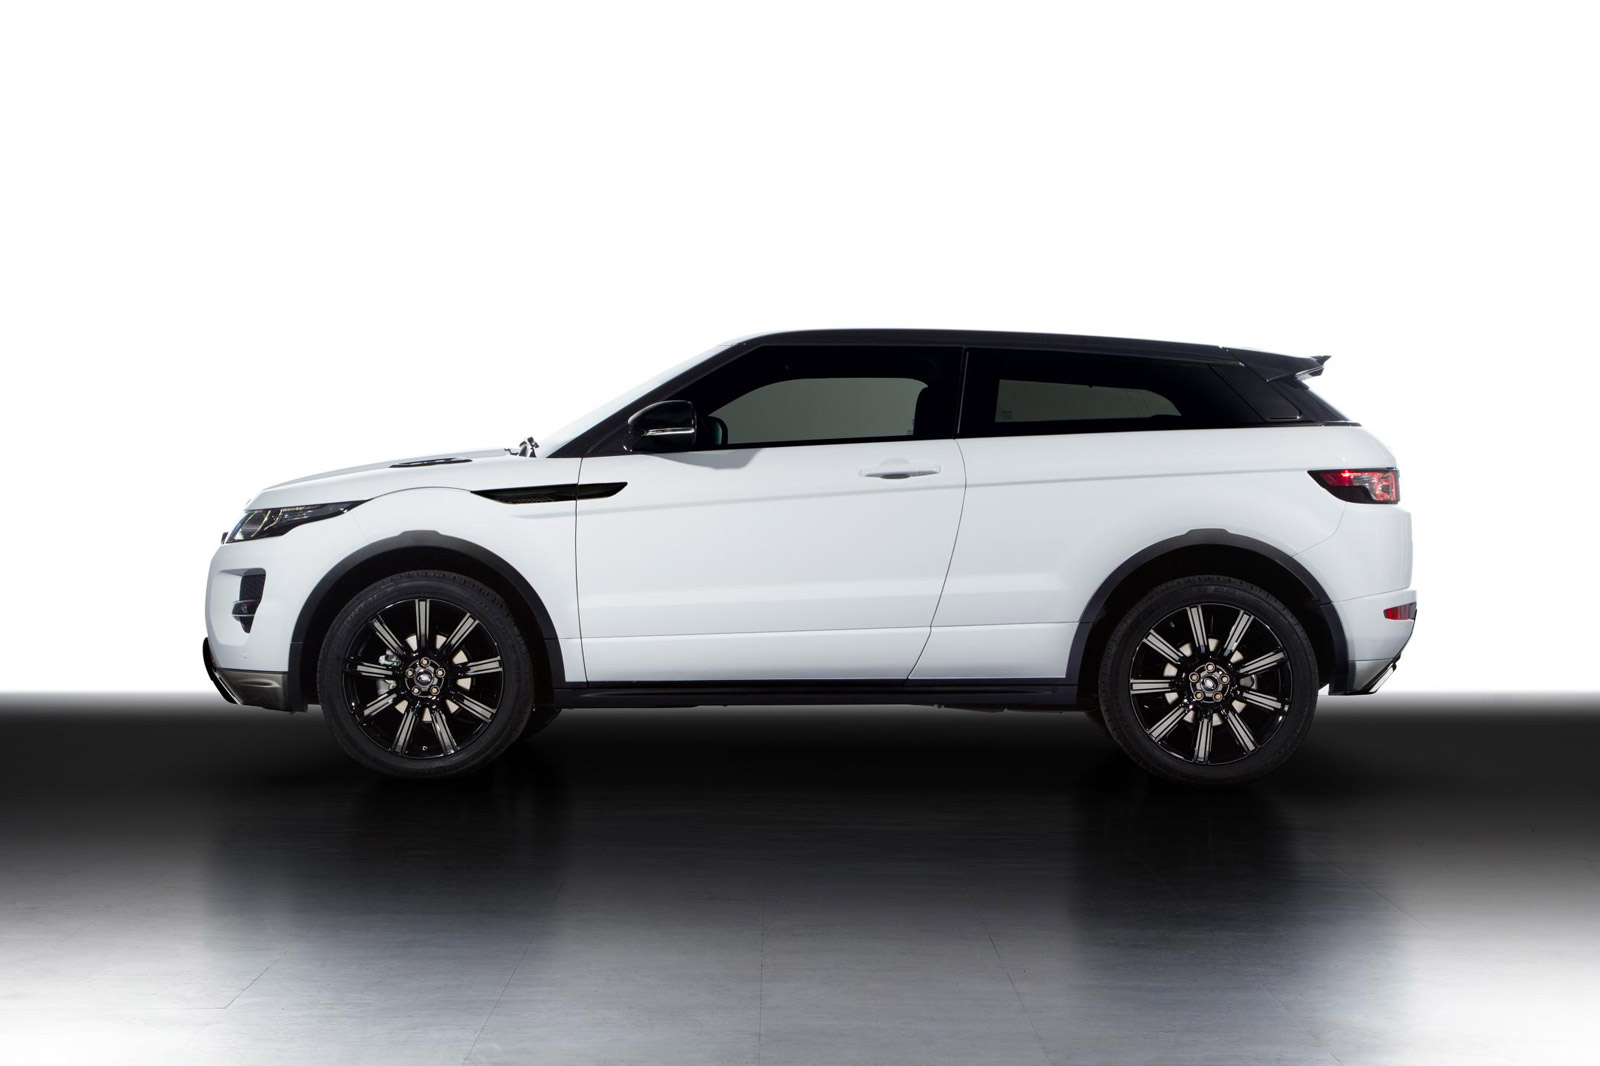 2013 Land Rover Range Rover Evoque Review Ratings Specs Prices And Photos The Car Connection